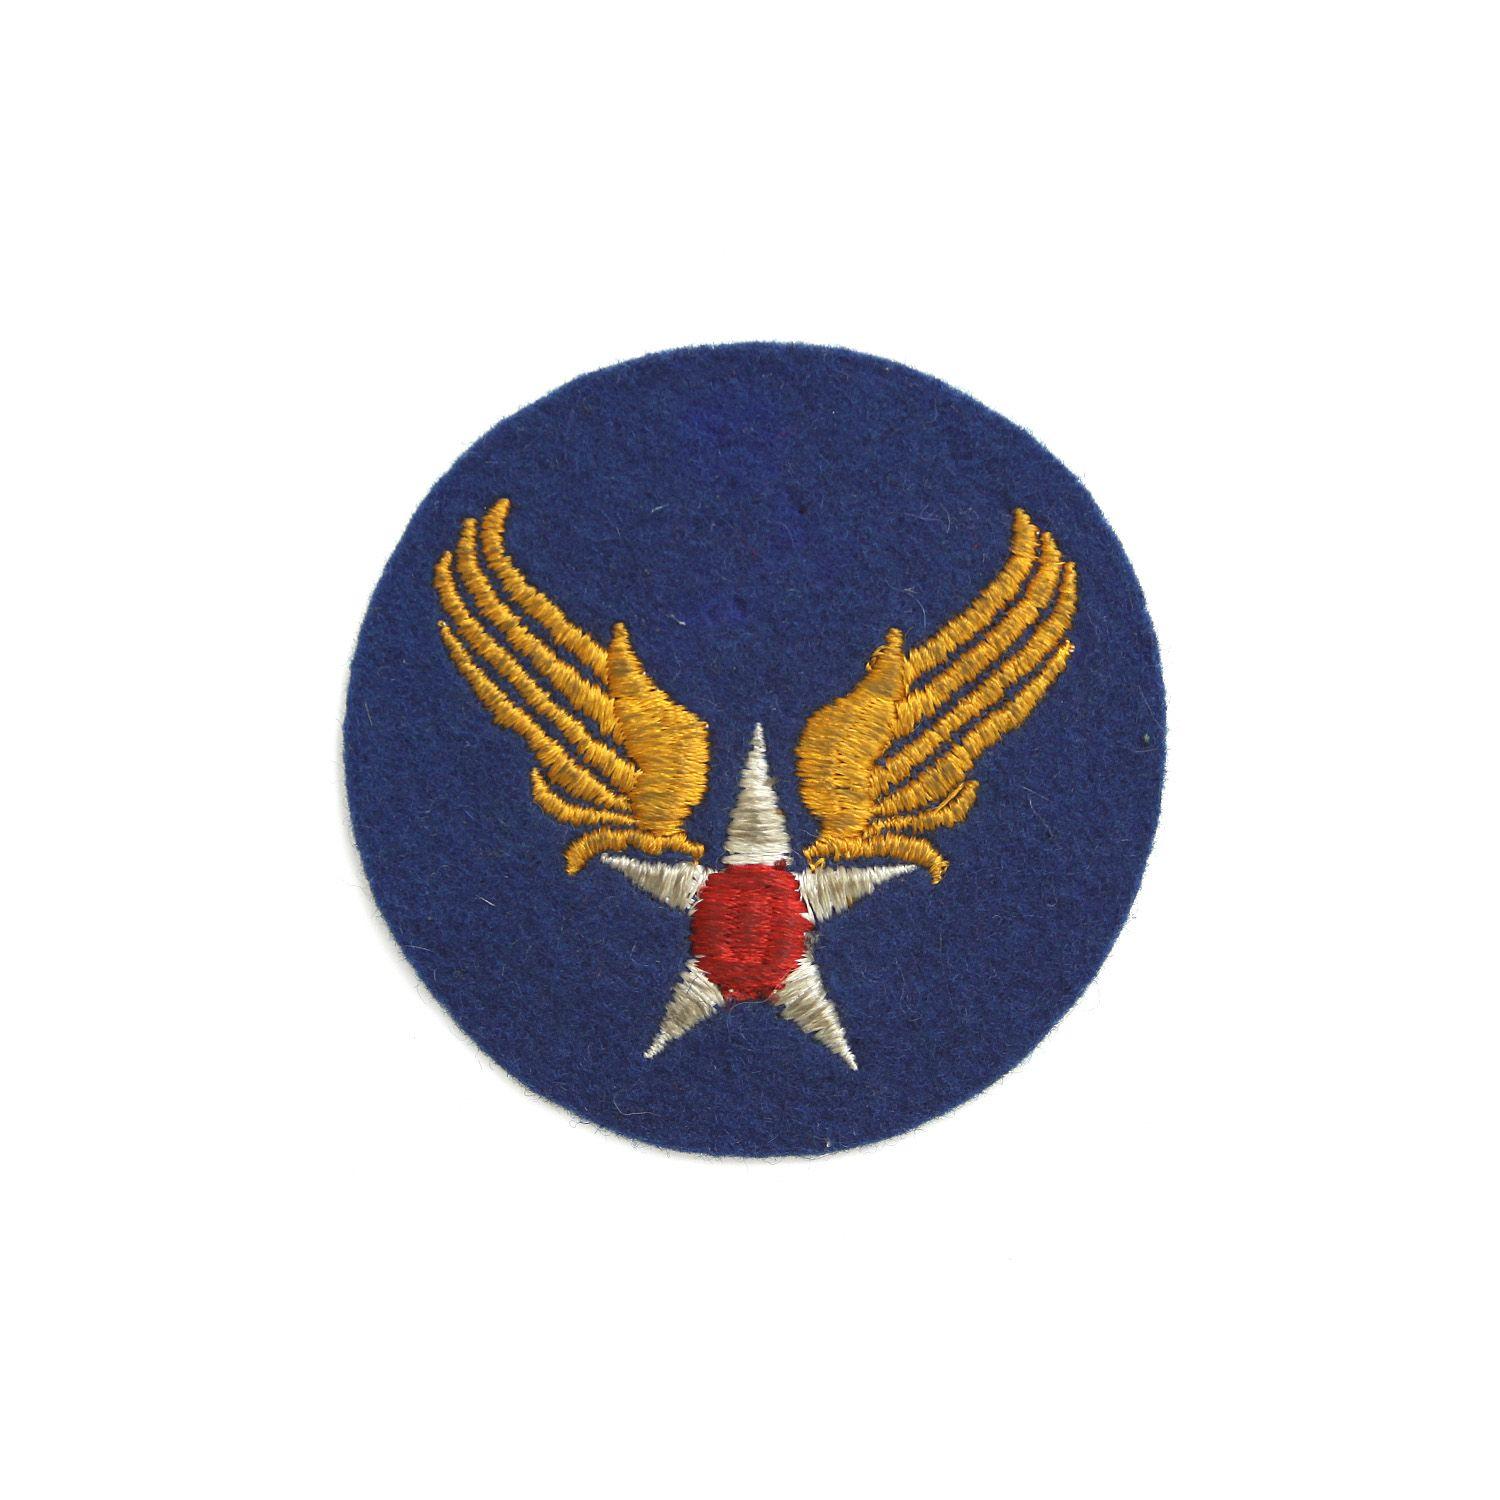 U.S. Army Air Force Logo - U.S. Army Air Force Patch Mobility Command Museum